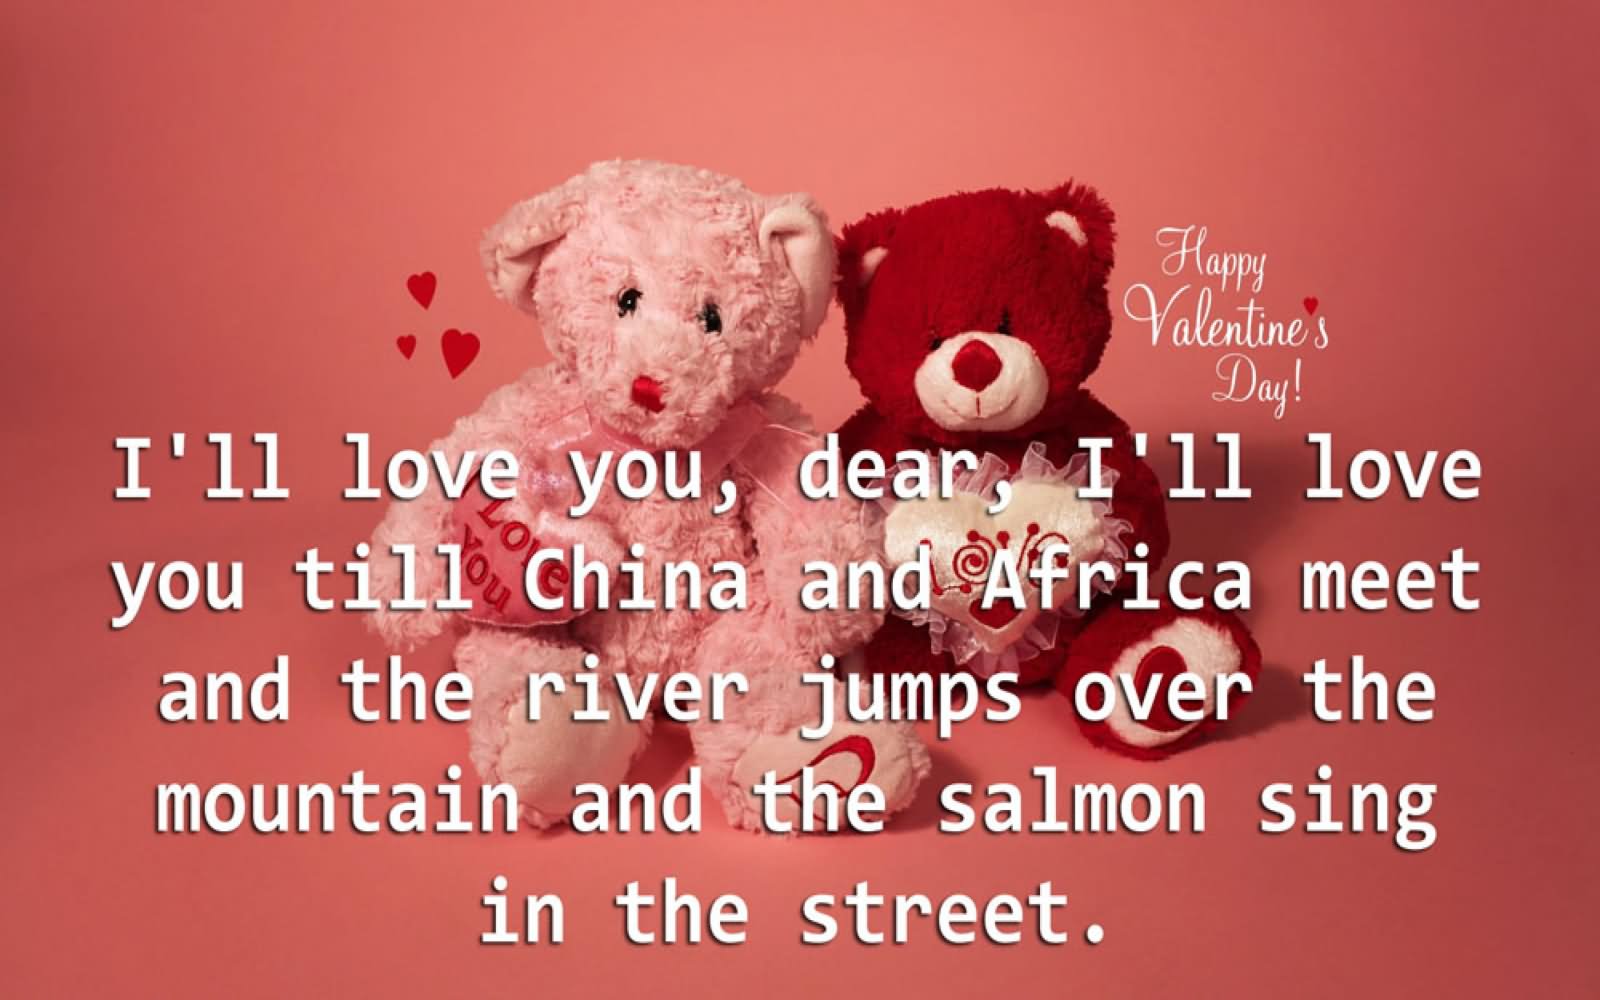 I’ll love you till China and Africa meet and the river jumps over the mountain and the salmon sing in the street.